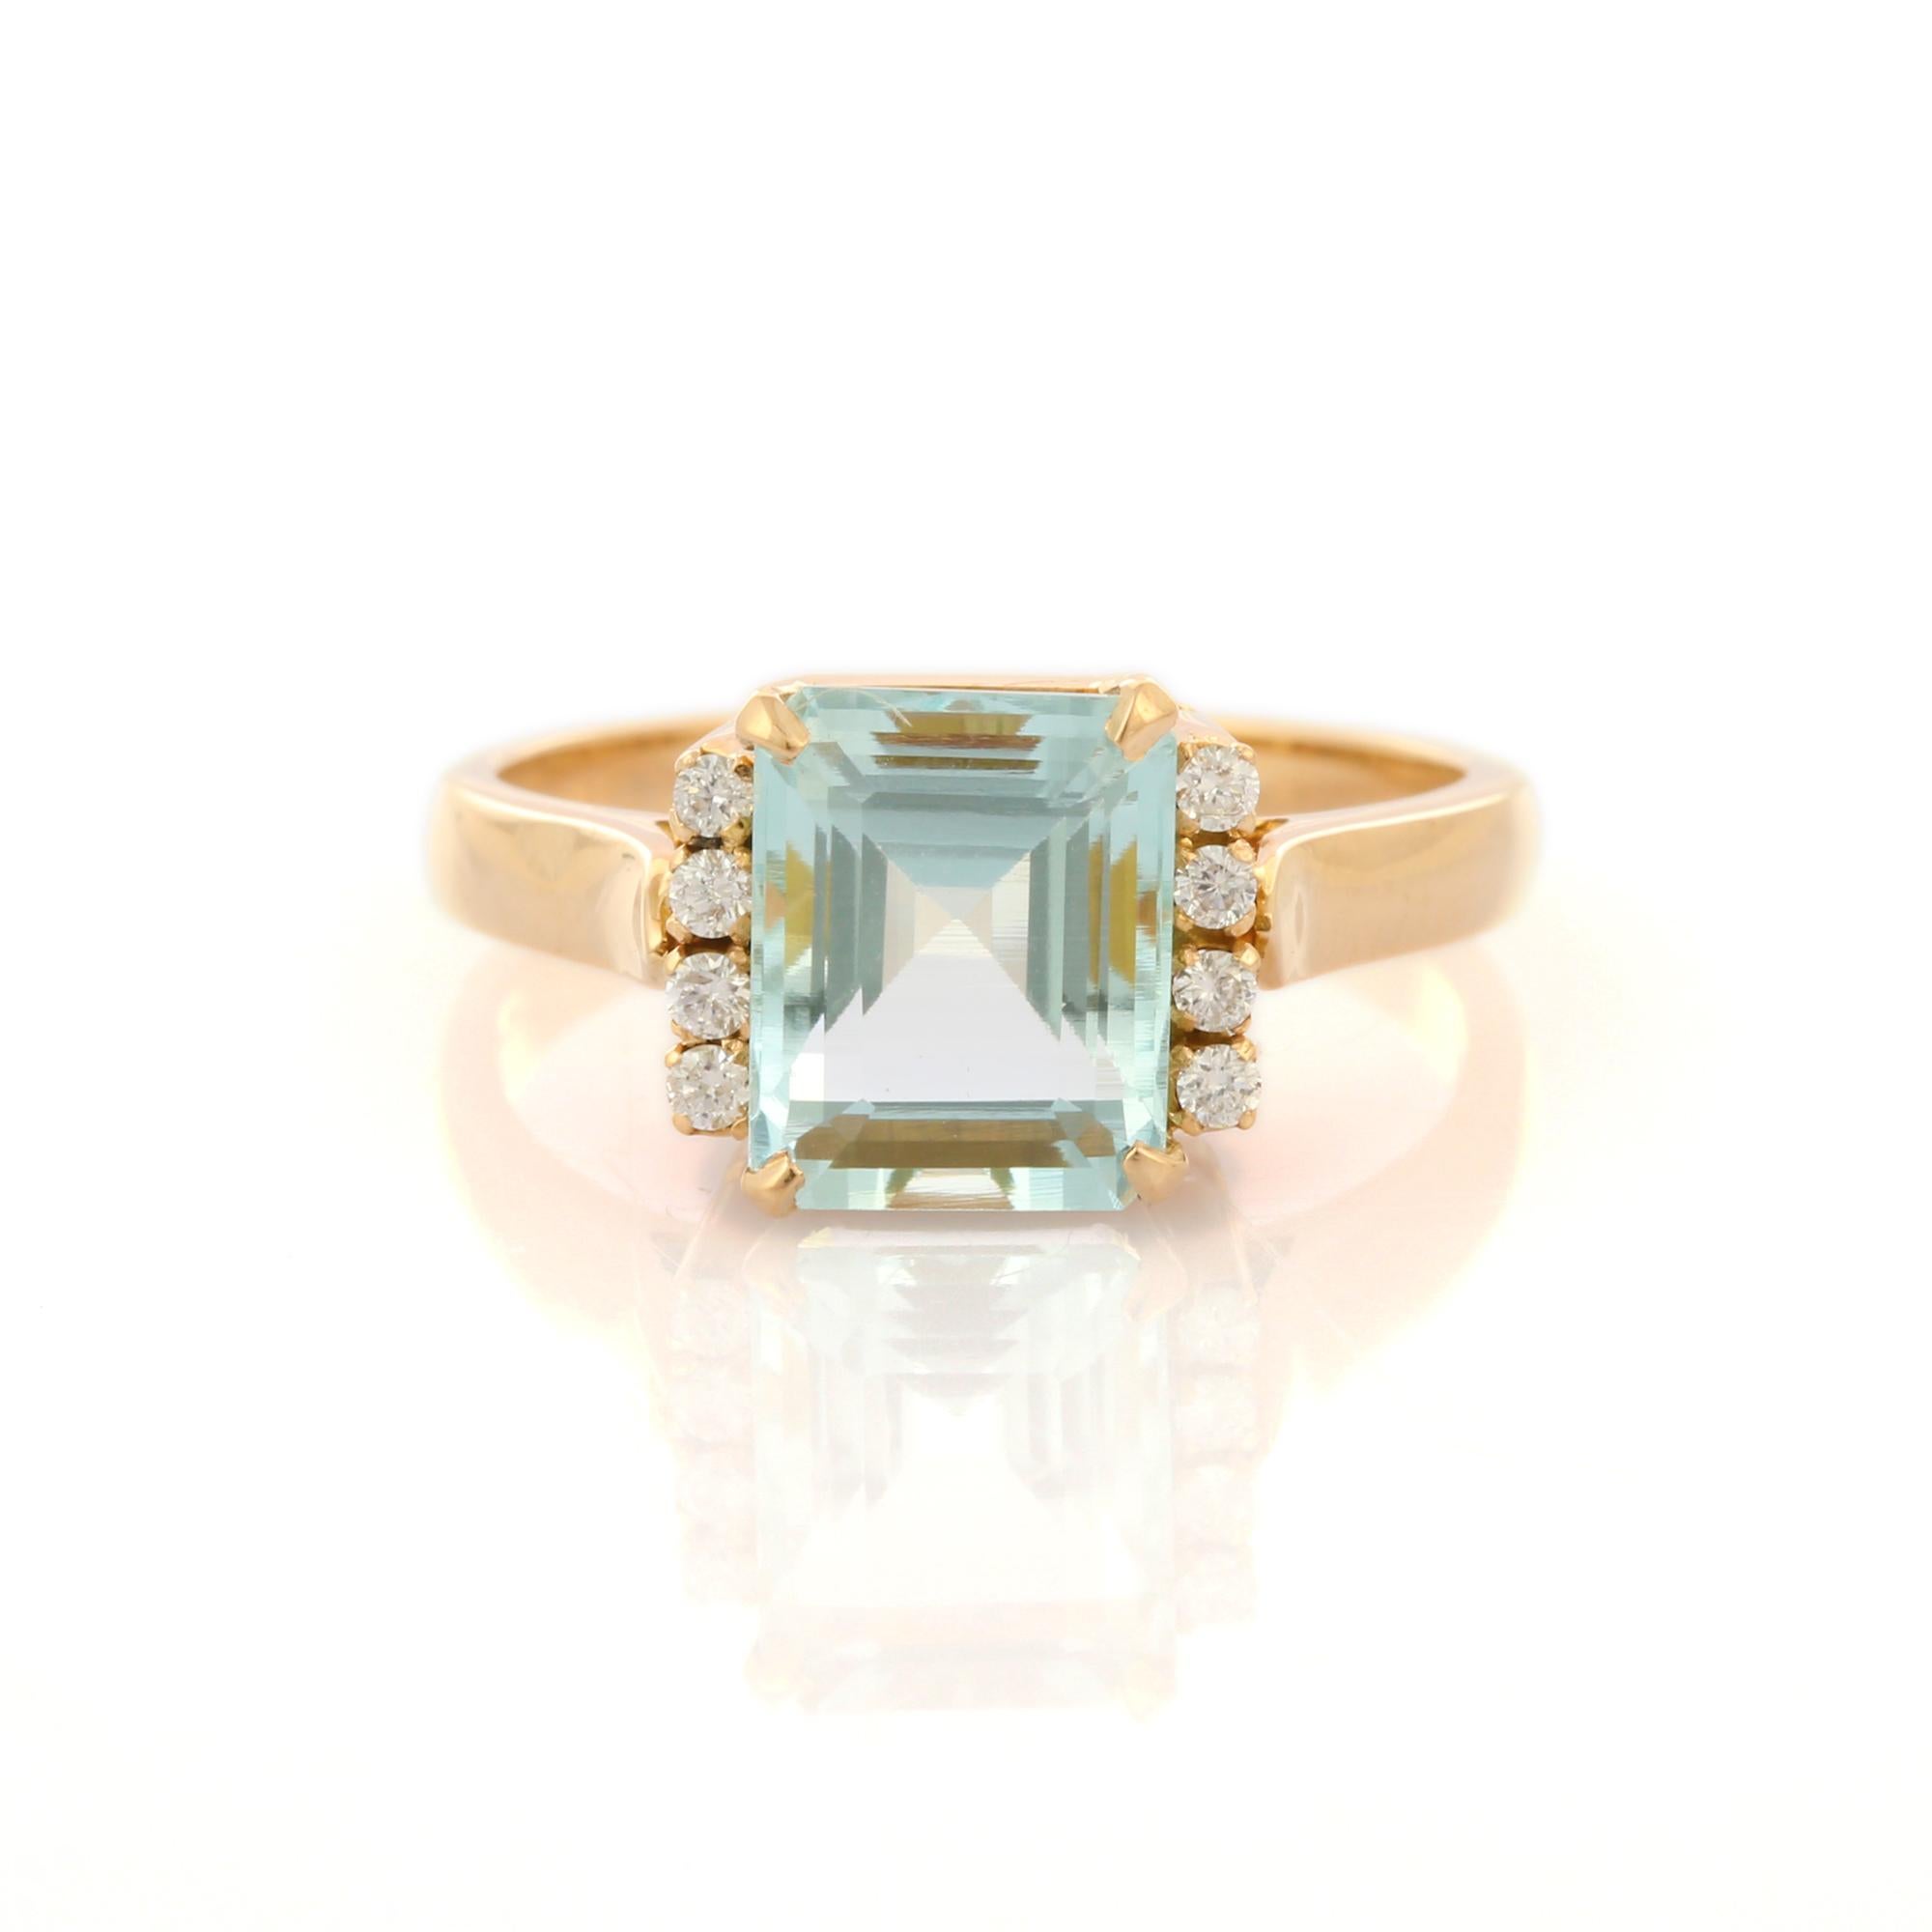 For Sale:  Octagon Cut 2.65 ct Aquamarine Cocktail Ring in 18K Yellow Gold with Diamonds  9